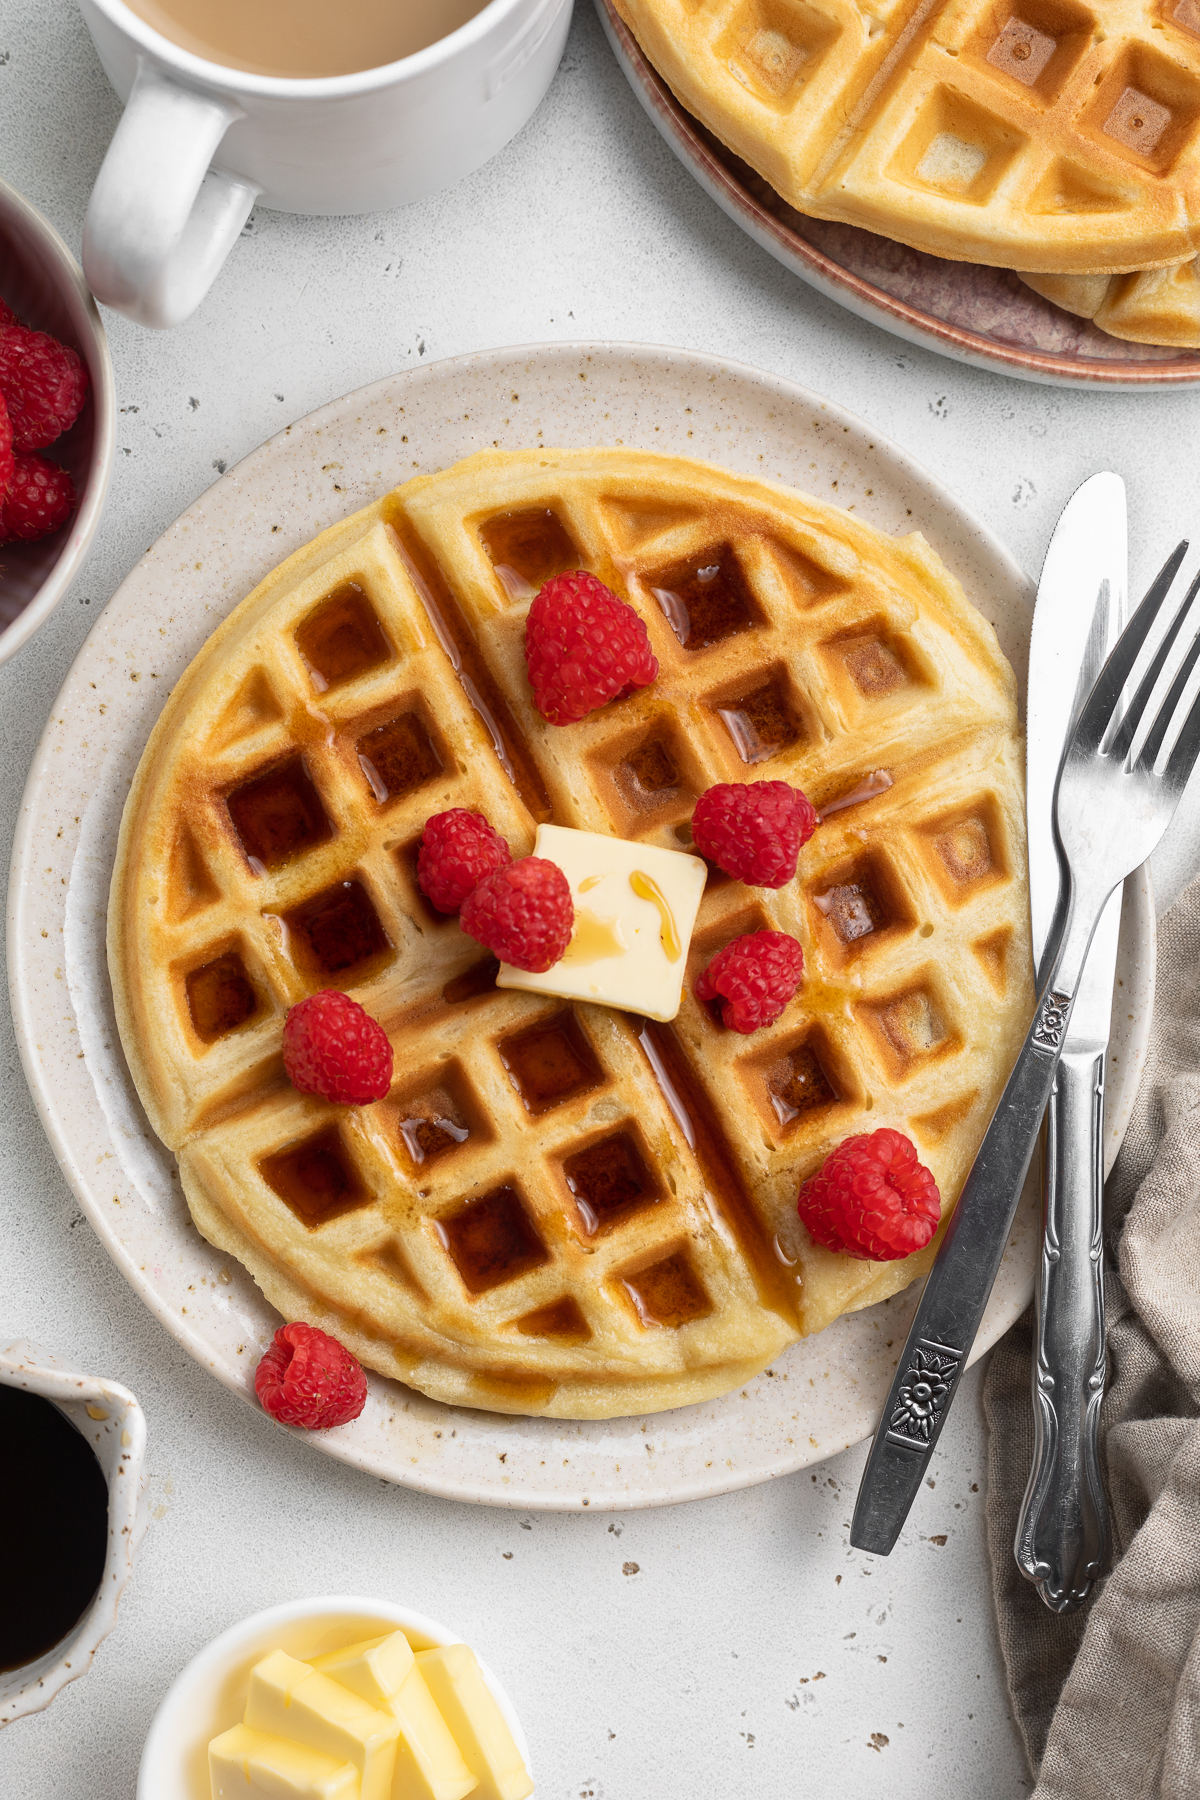 Overhead view of a plate of round, fluffy, Belgian-style gluten-free waffles  topped with butter, syrup, and fresh red raspberries with silverware.